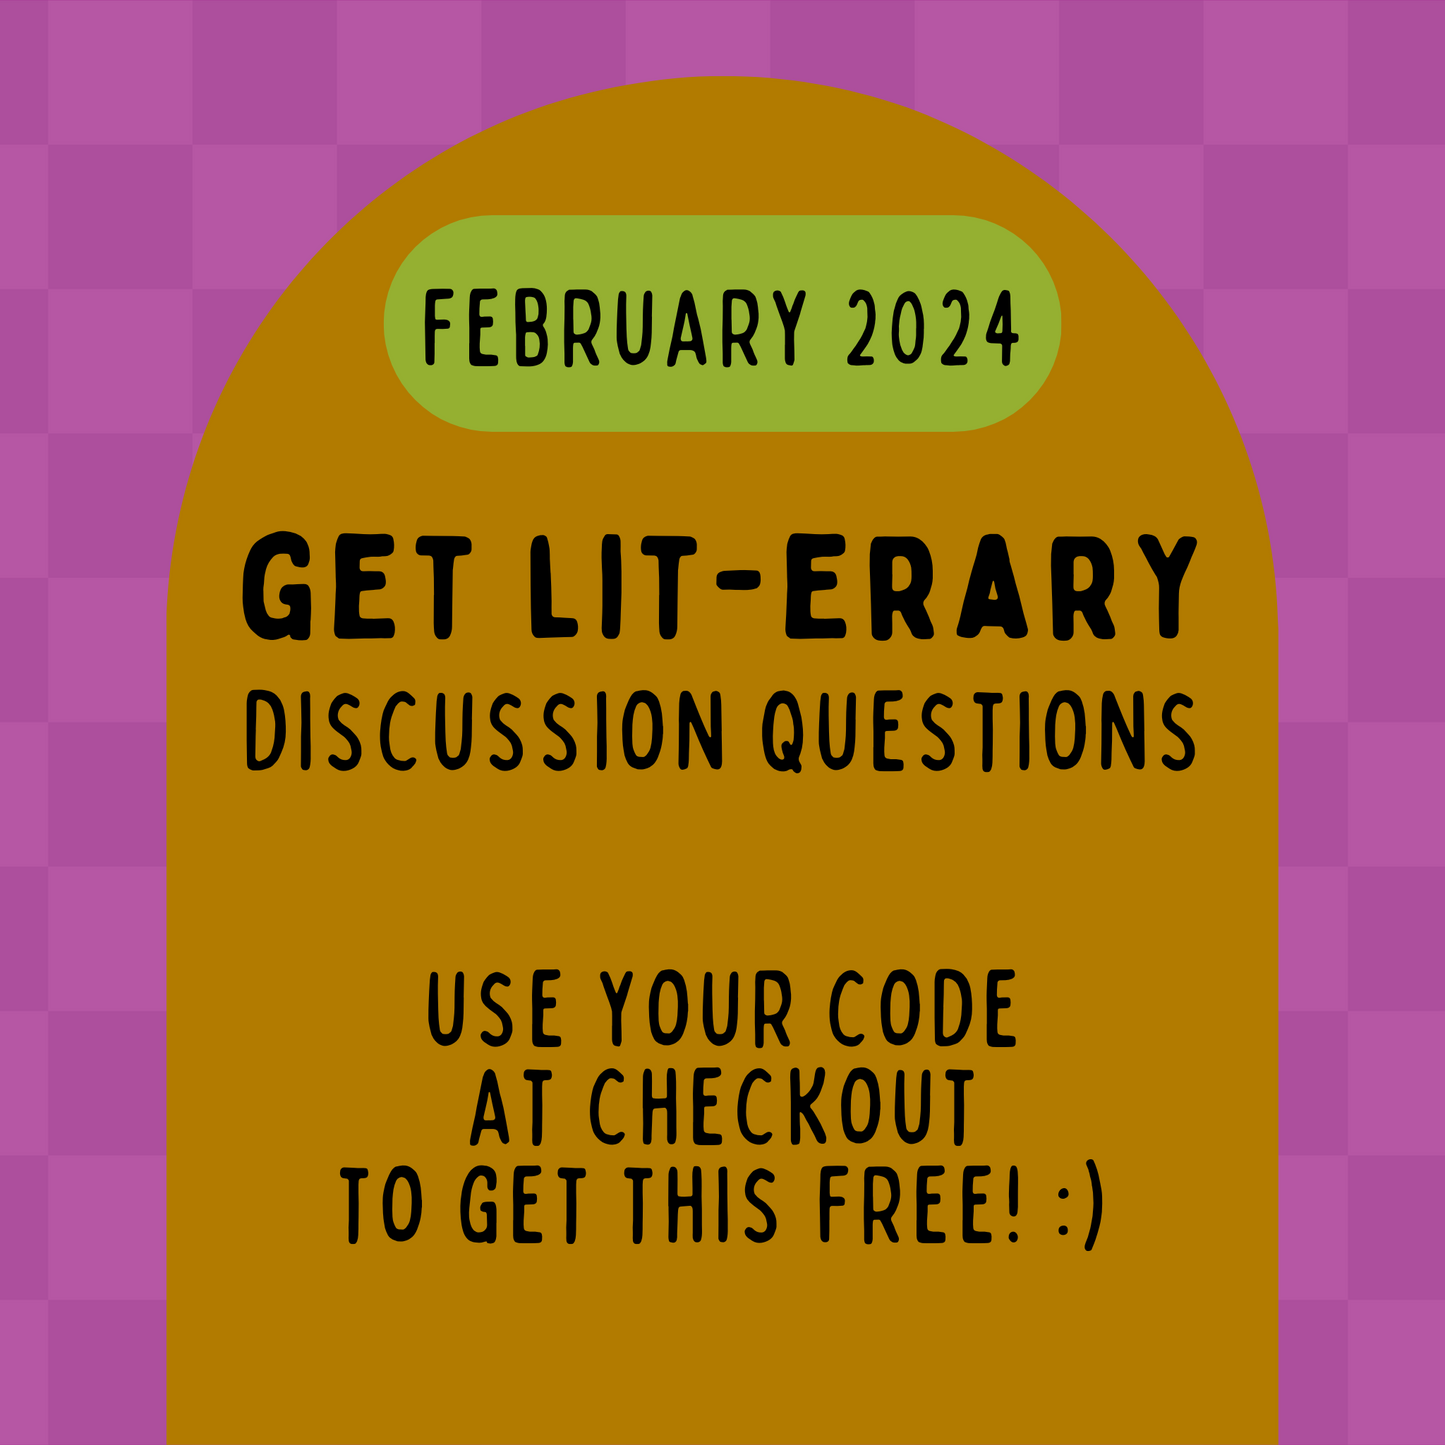 February 2024 Get Literary Book Club Discussion Questions